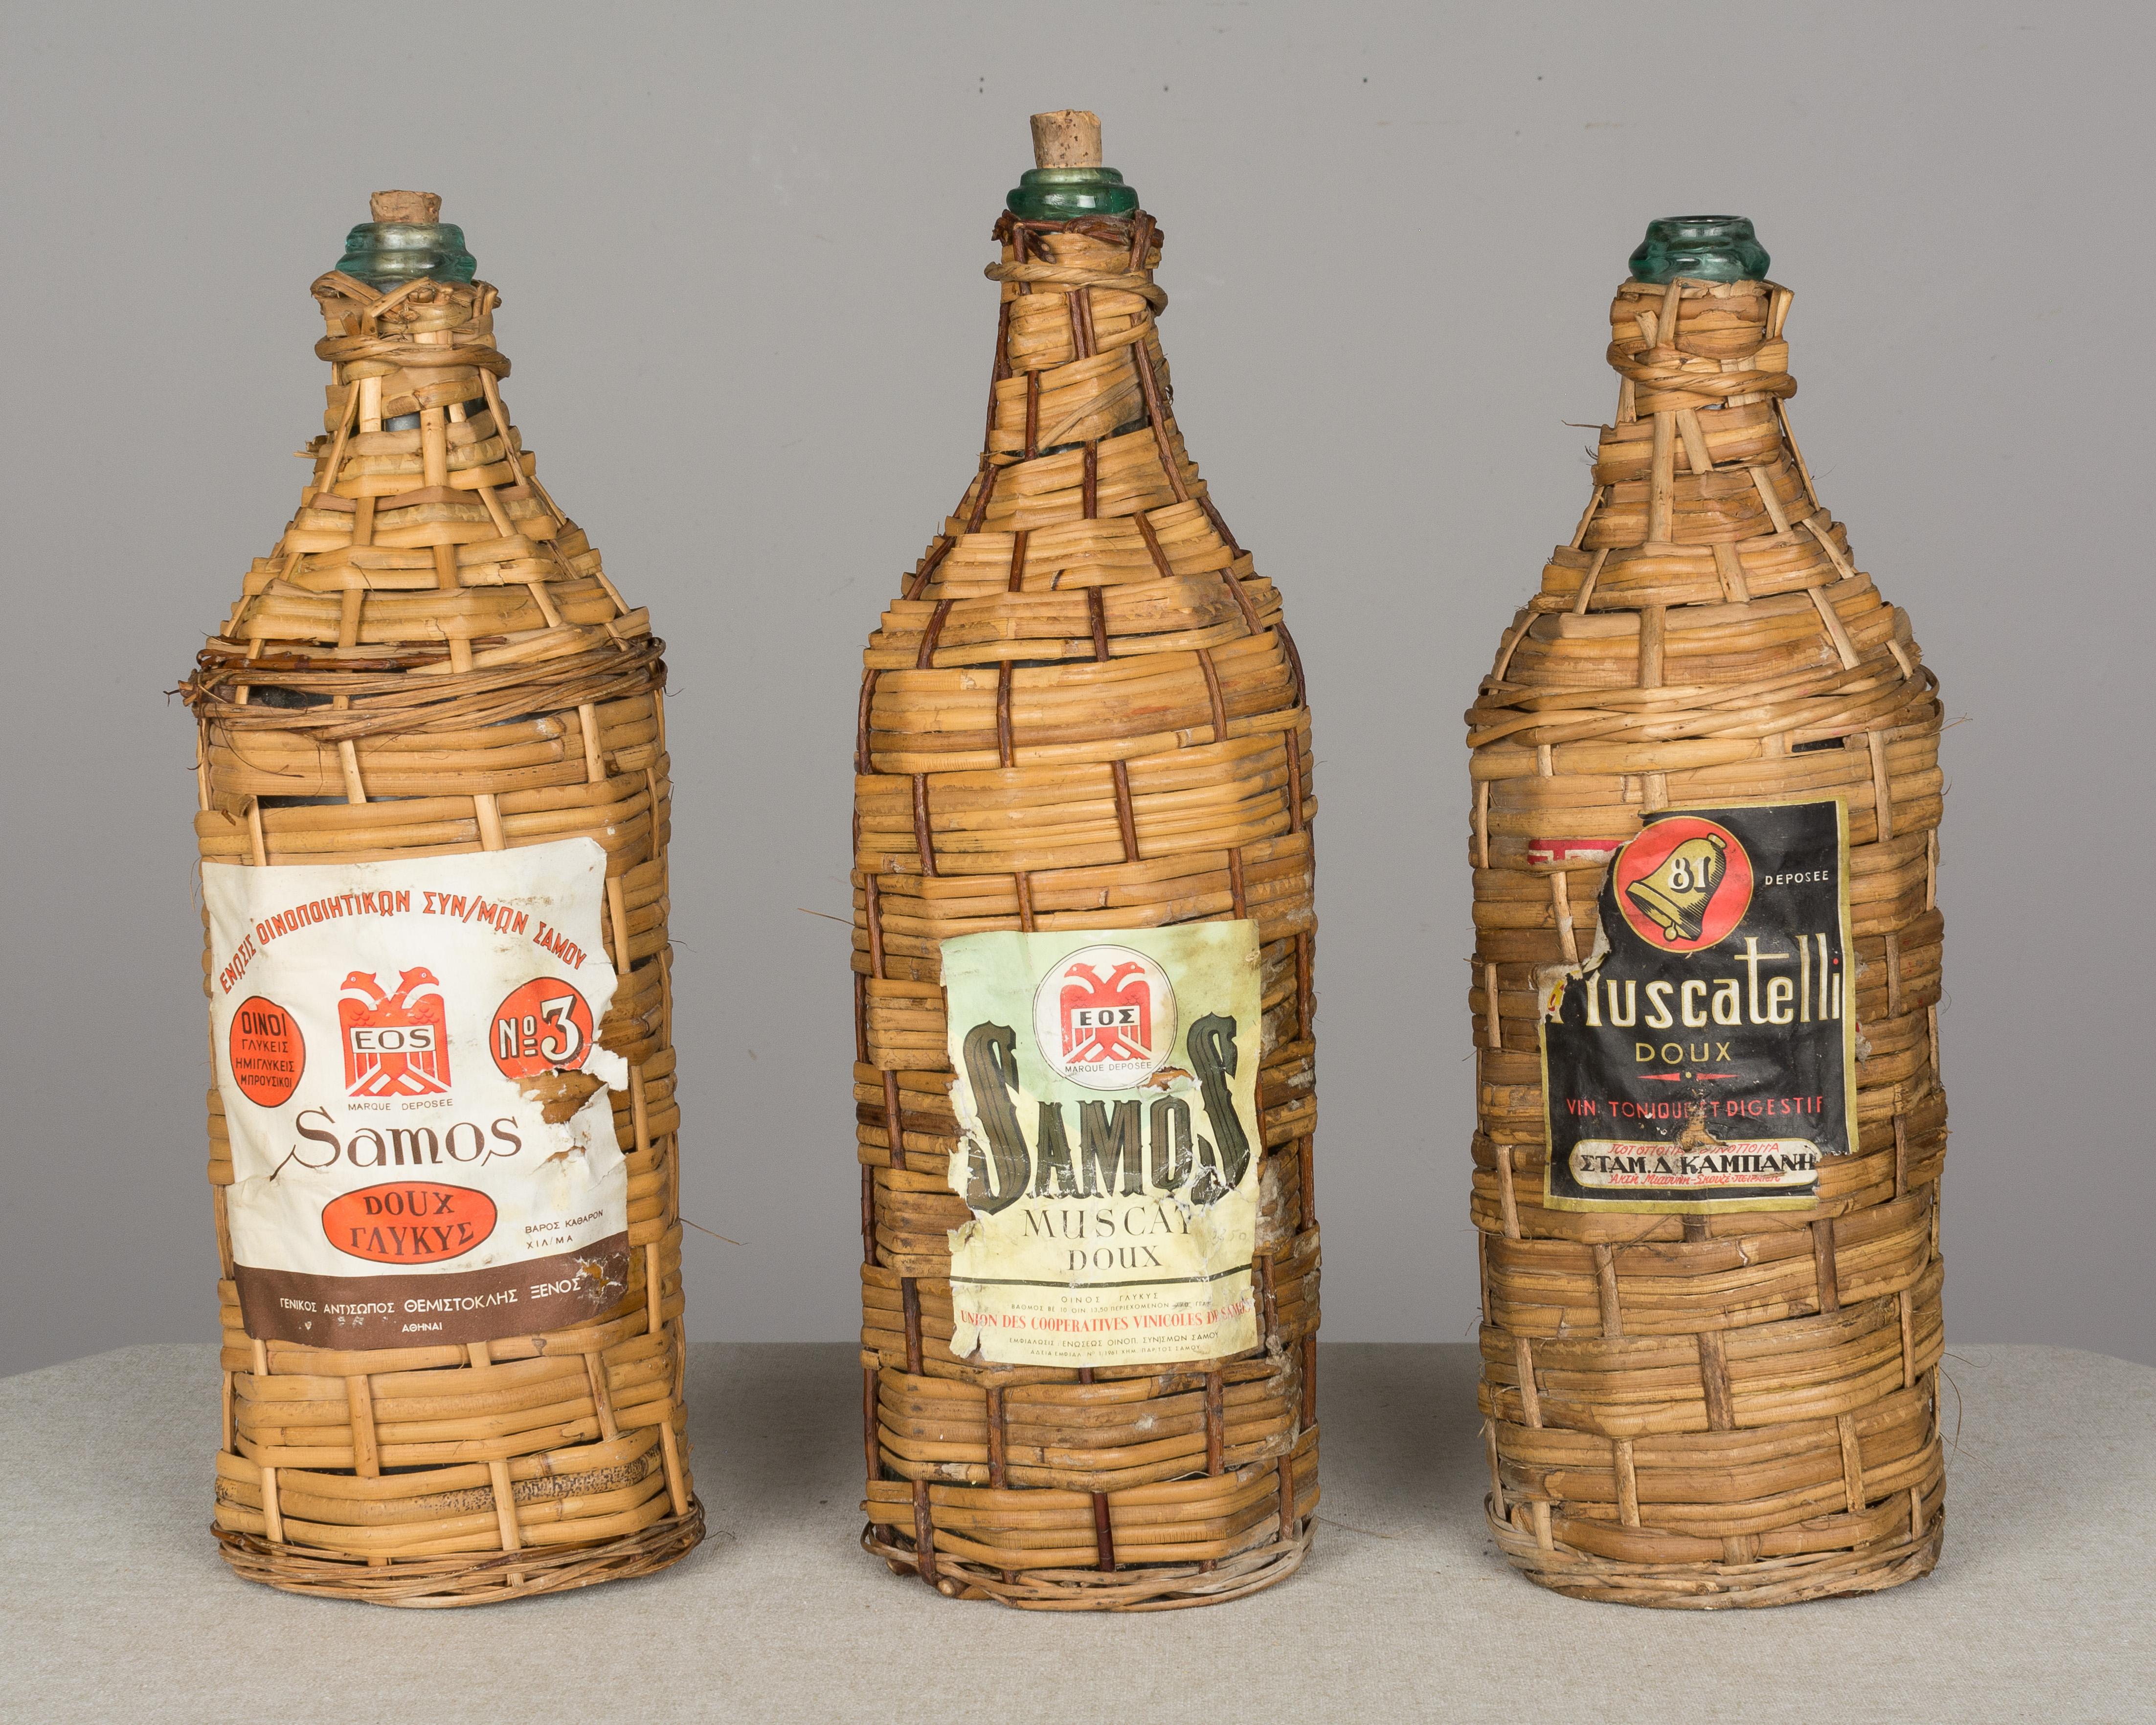 A set of six vintage wicker-wrapped glass bottles with handles. Original paper wine labels on three, two with corks. Smallest bottle with double handles is more tightly woven. Purchased along with a midcentury rattan bar from the French